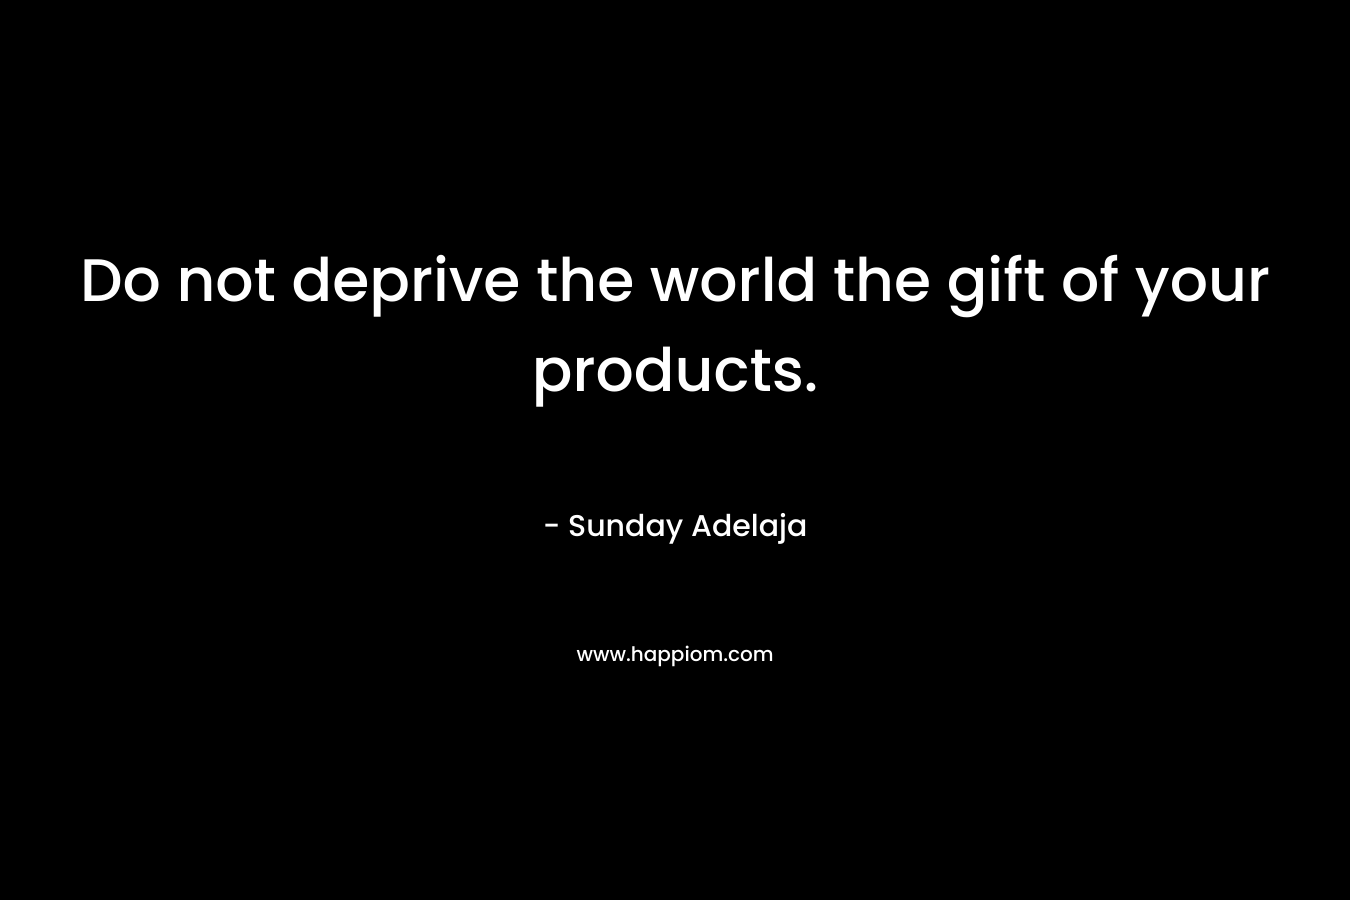 Do not deprive the world the gift of your products.